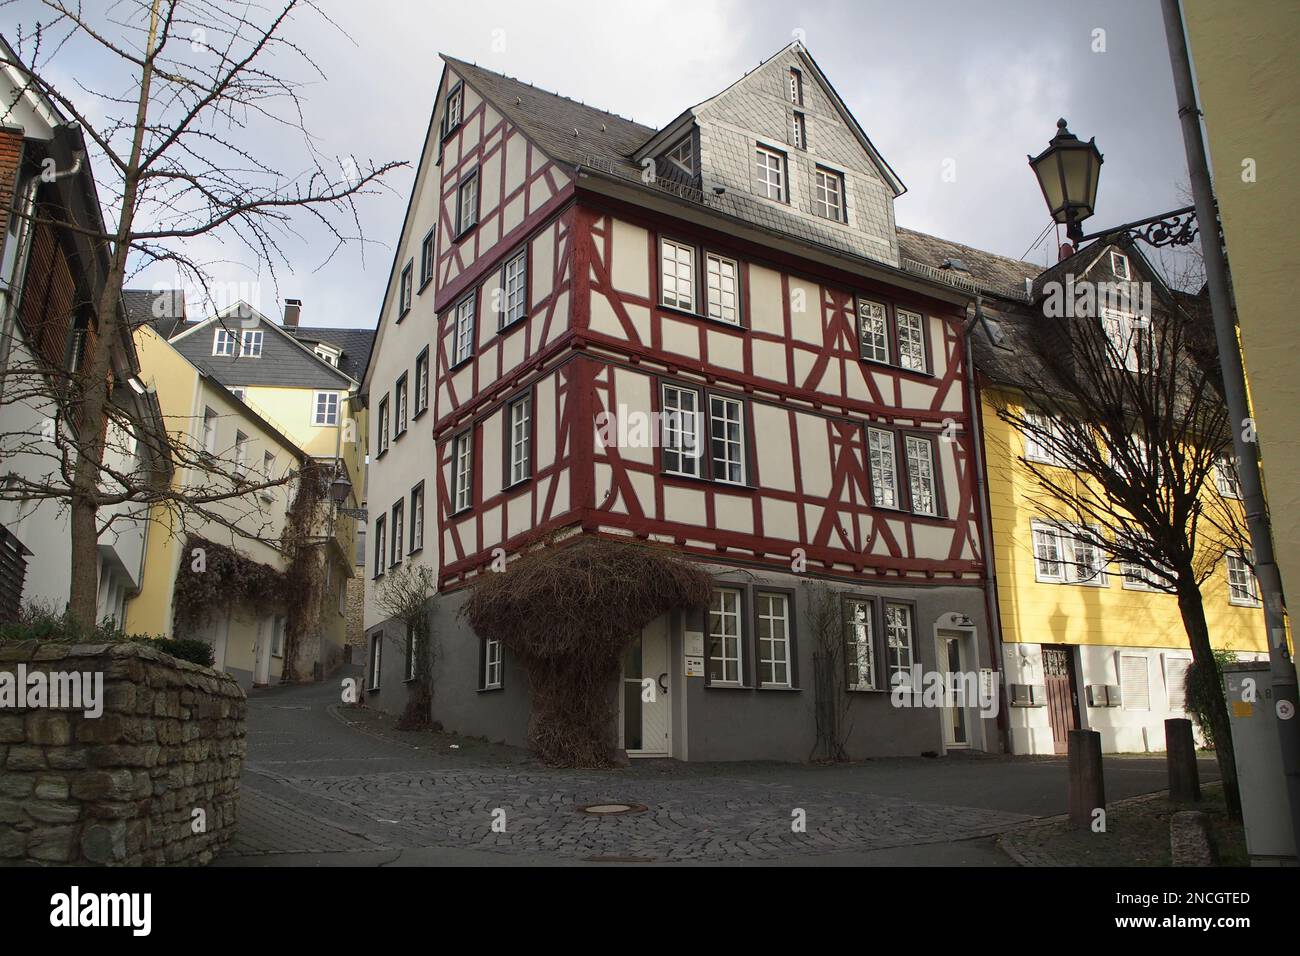 Traditional timber-framed houses in the heart of the old town, Wetzlar, Germany Stock Photo